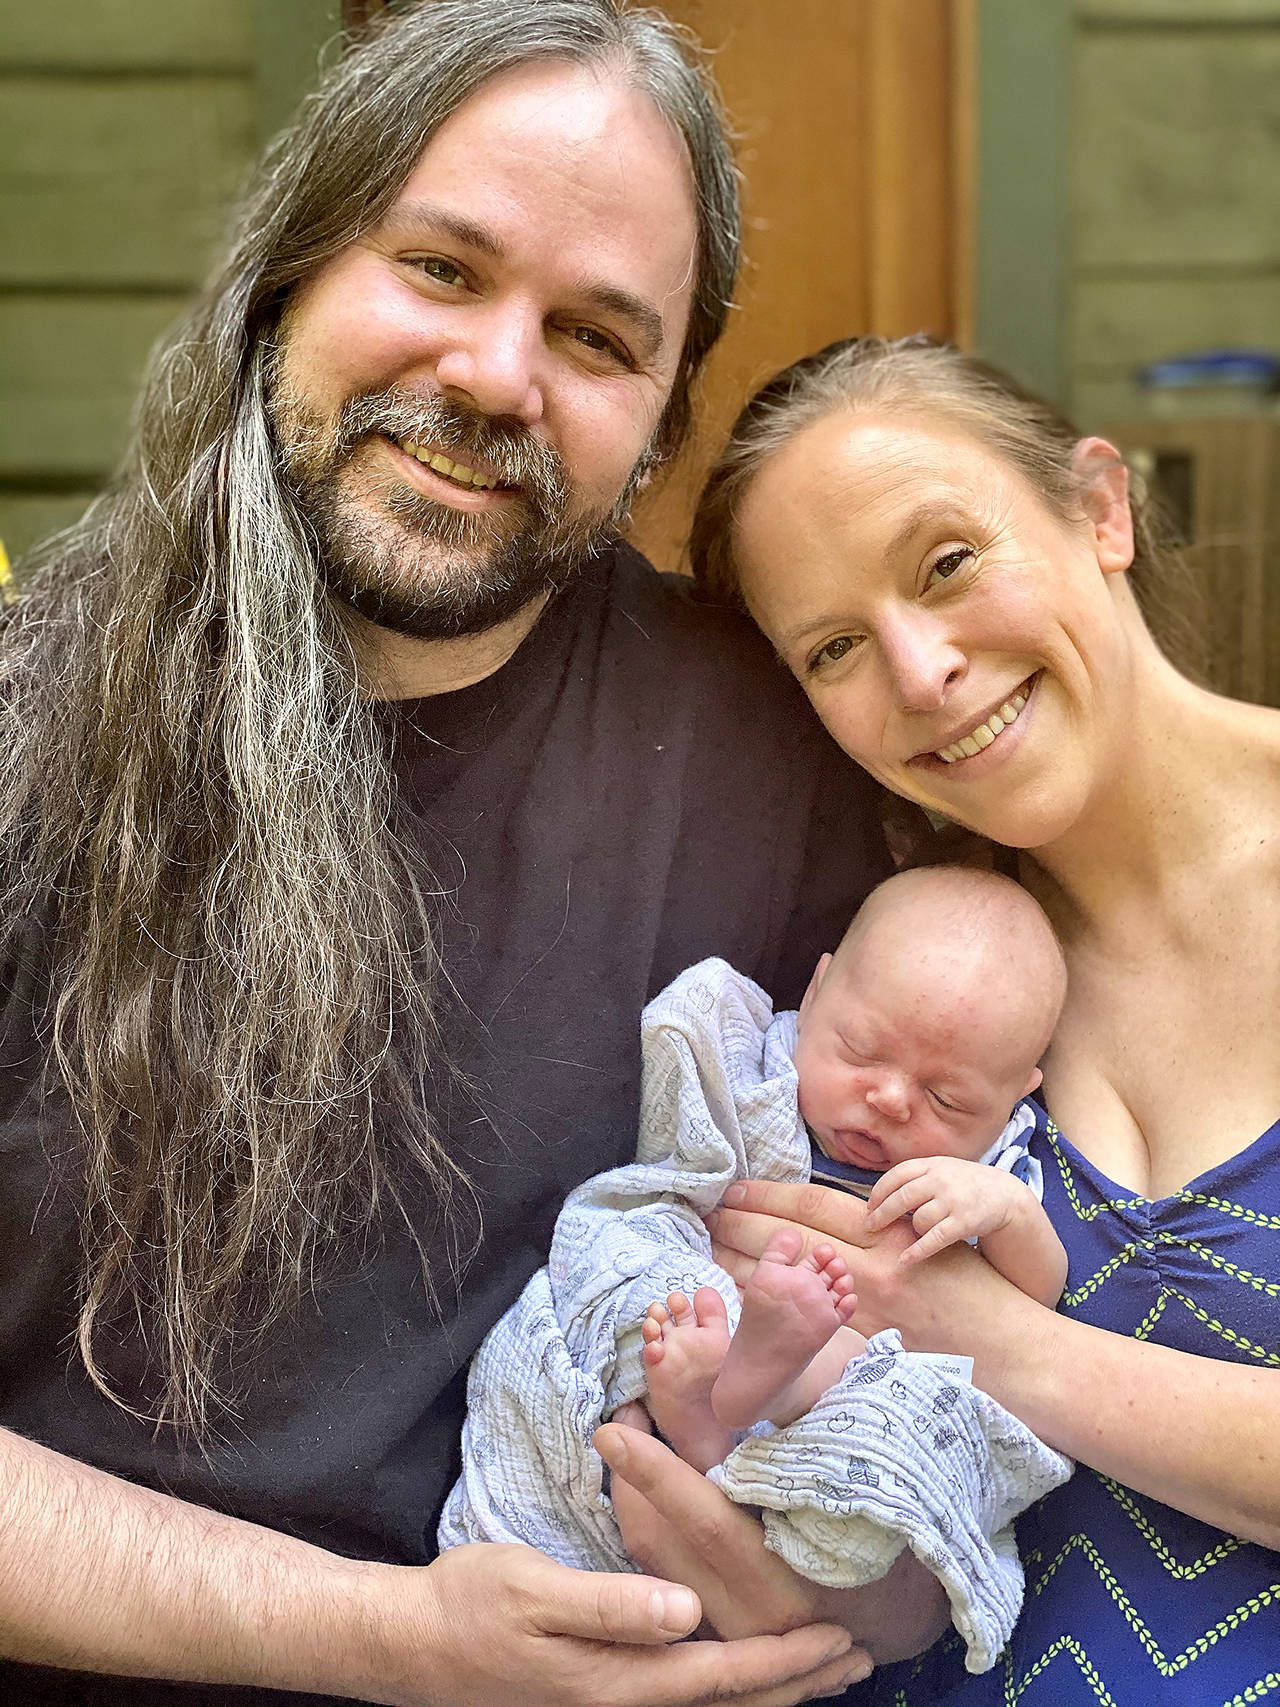 Charlotte Daphne-Celeste Buzard Simmons-Otness sleeps in the arms of her parents, Mark Buzard and Oriana Rose Crystal Anemone Simmons-Otness. The baby was born Aug. 19 in Everett. Her first three initials are CDC. (Andrea Brown / The Herald)